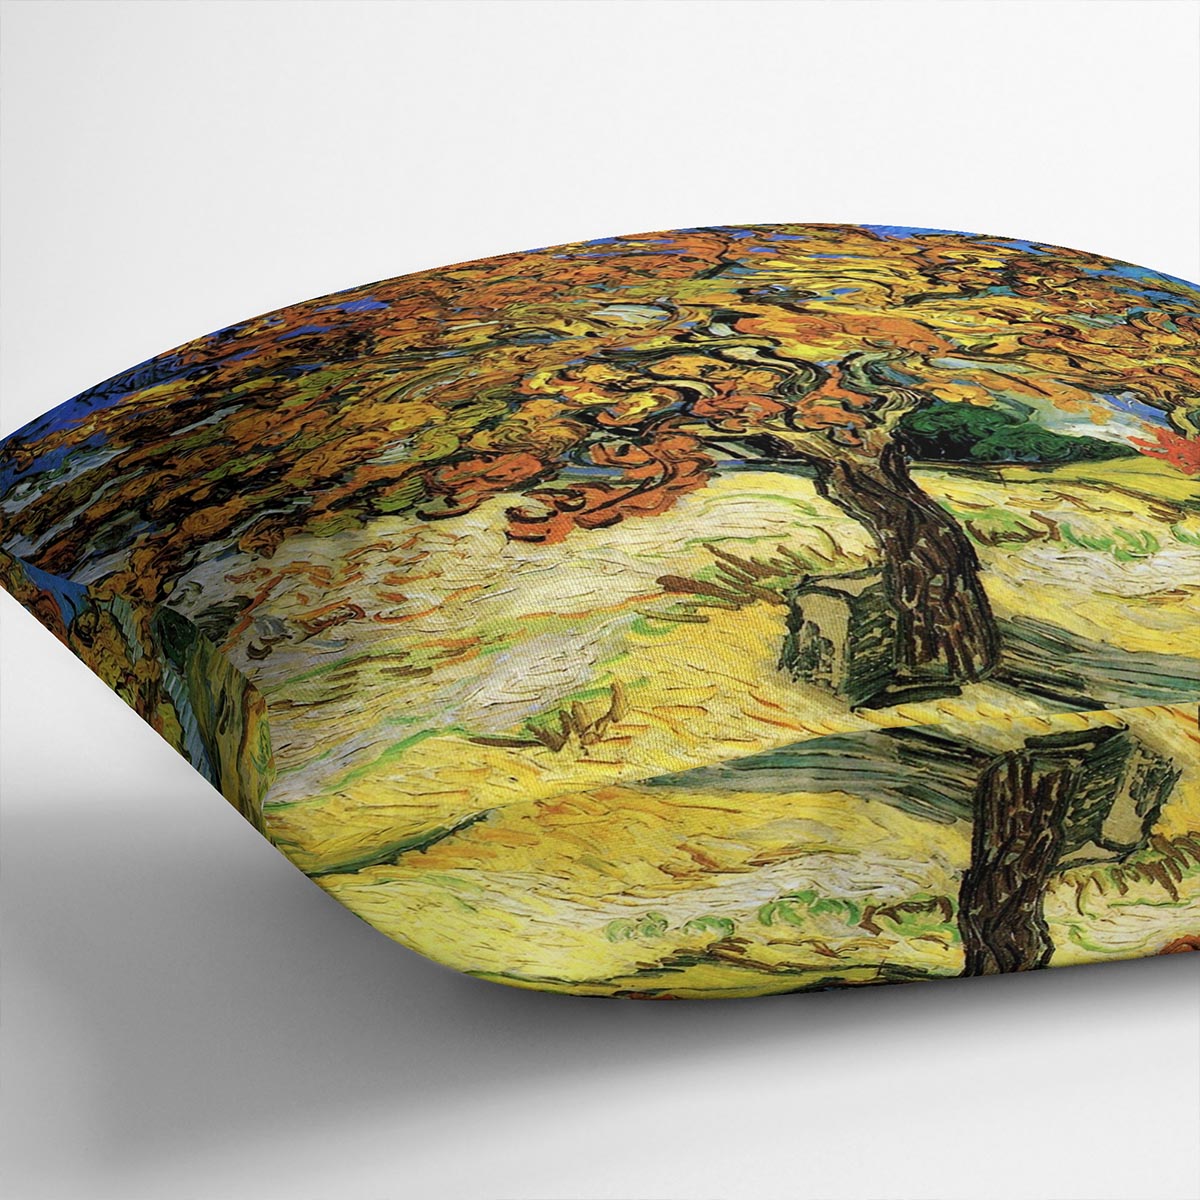 The Mulberry Tree by Van Gogh Cushion